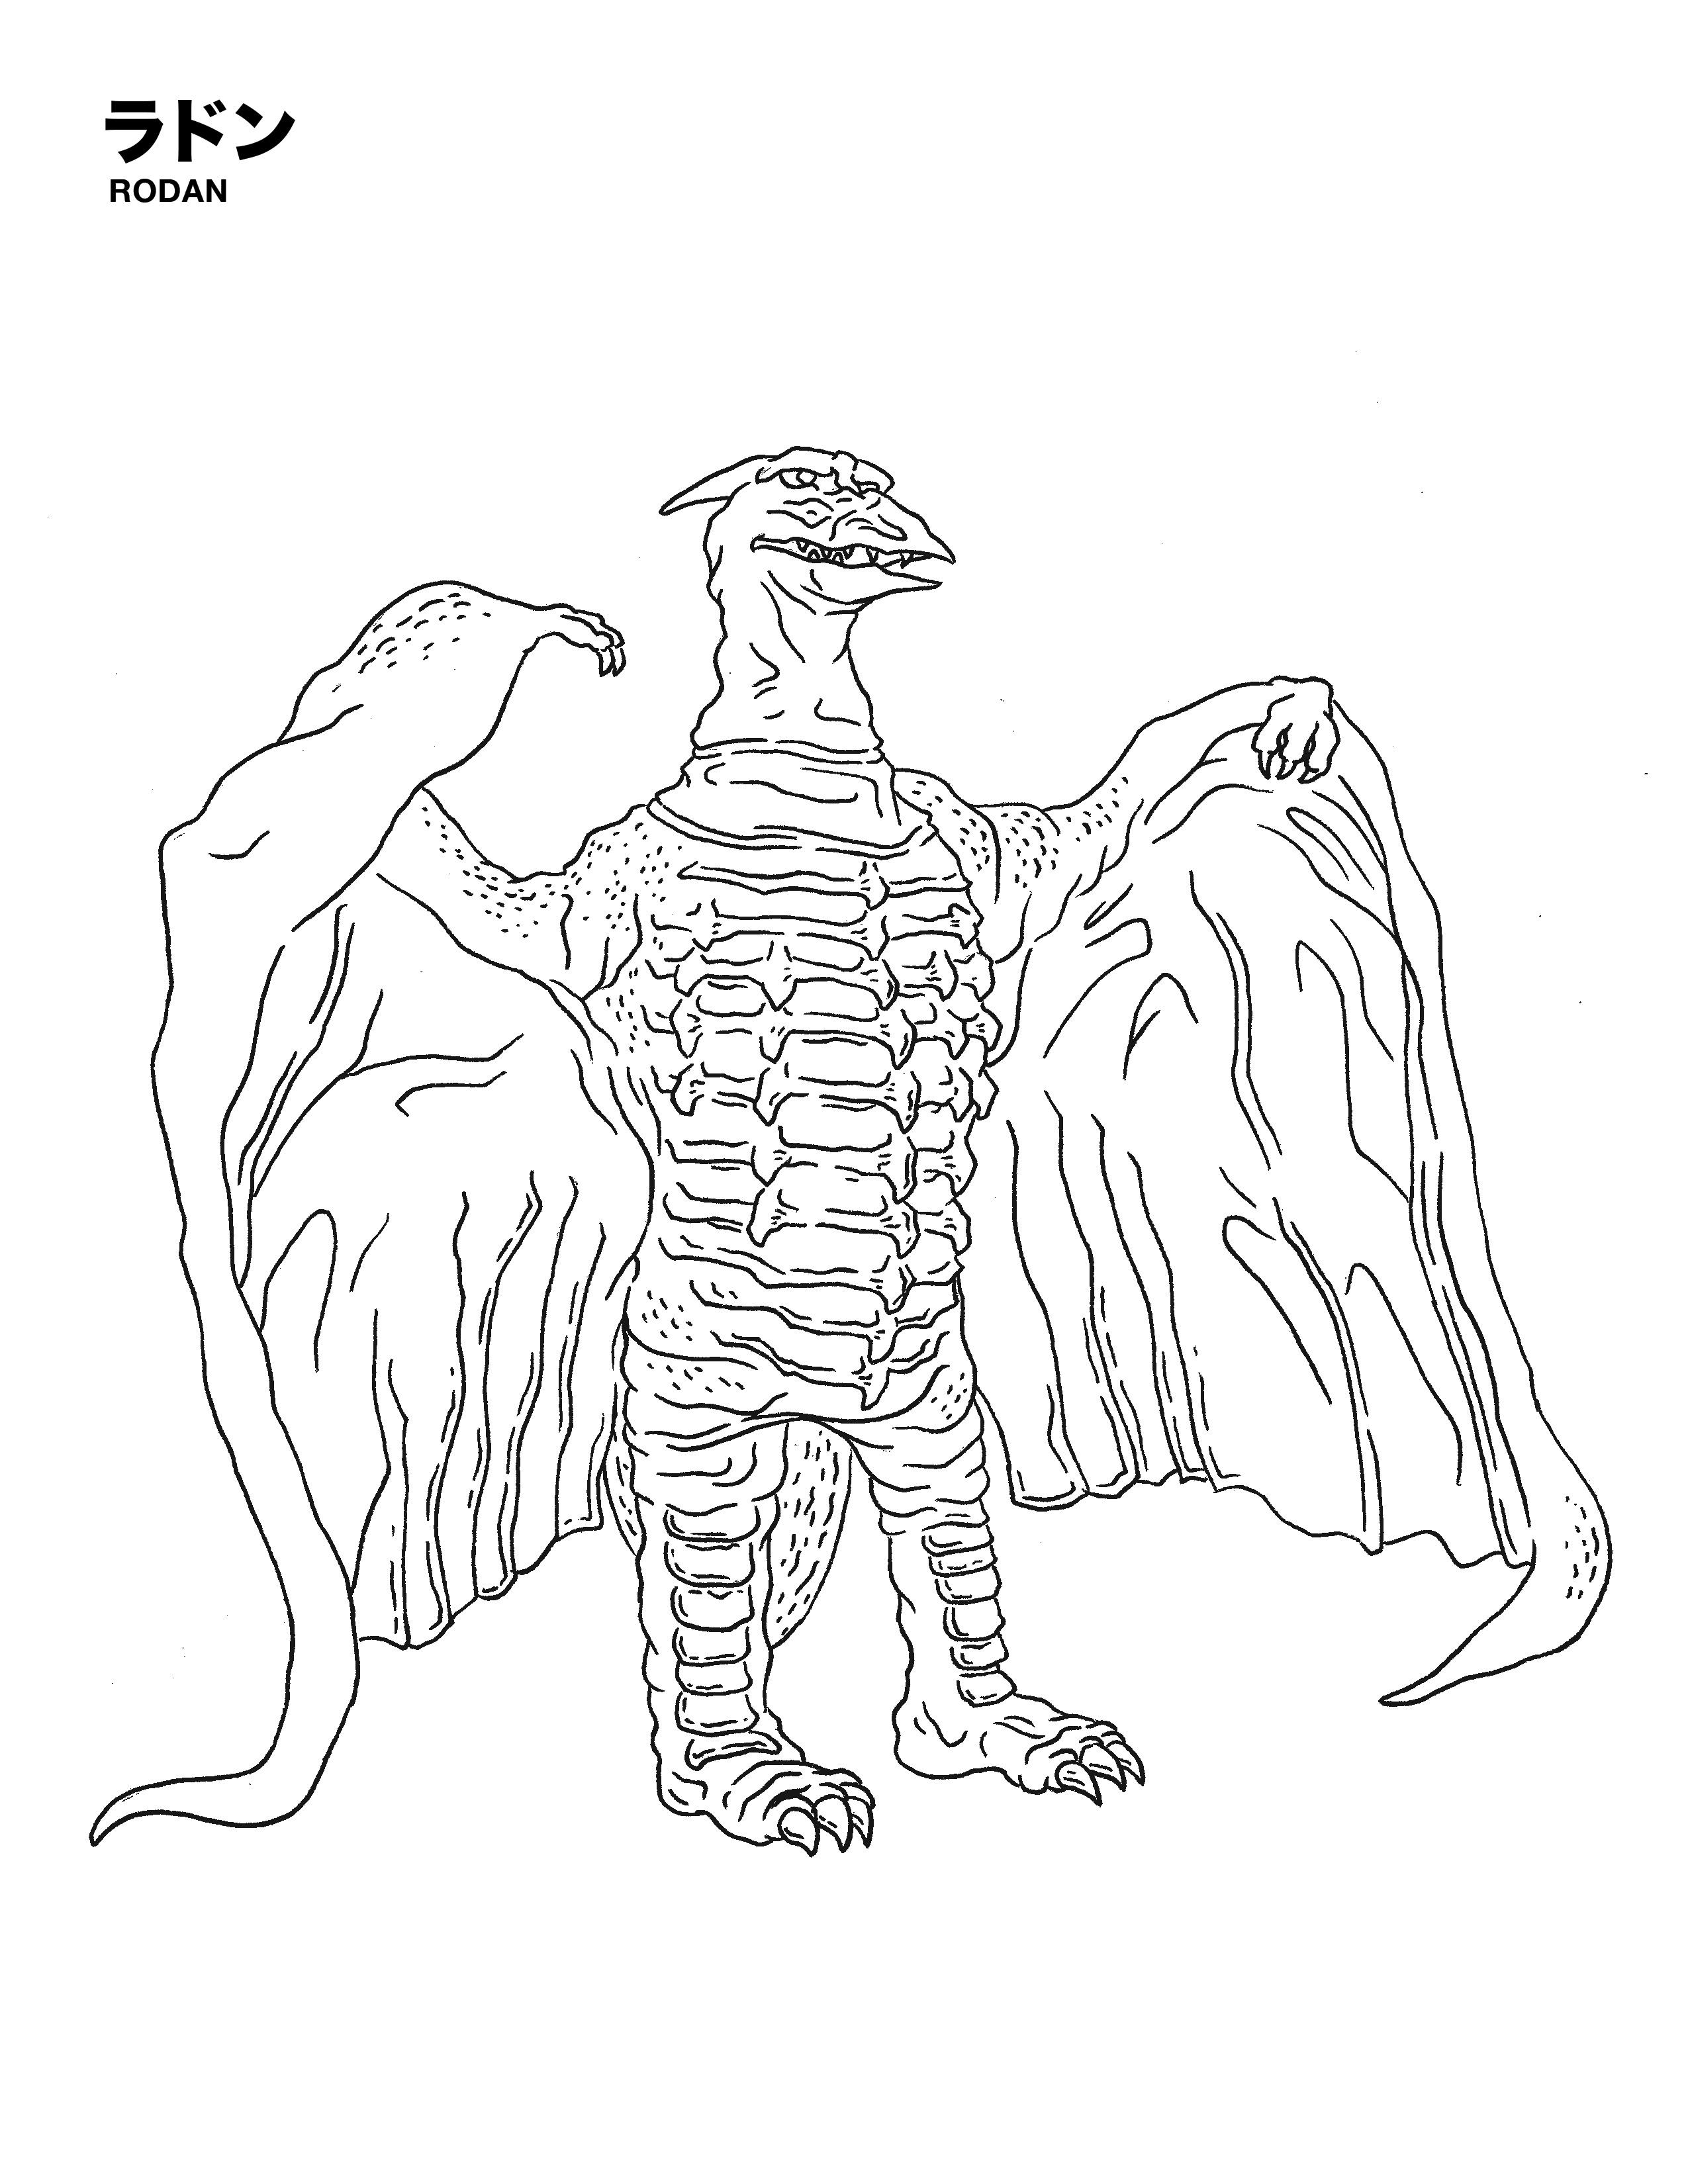 Rodan Coloring Pages.